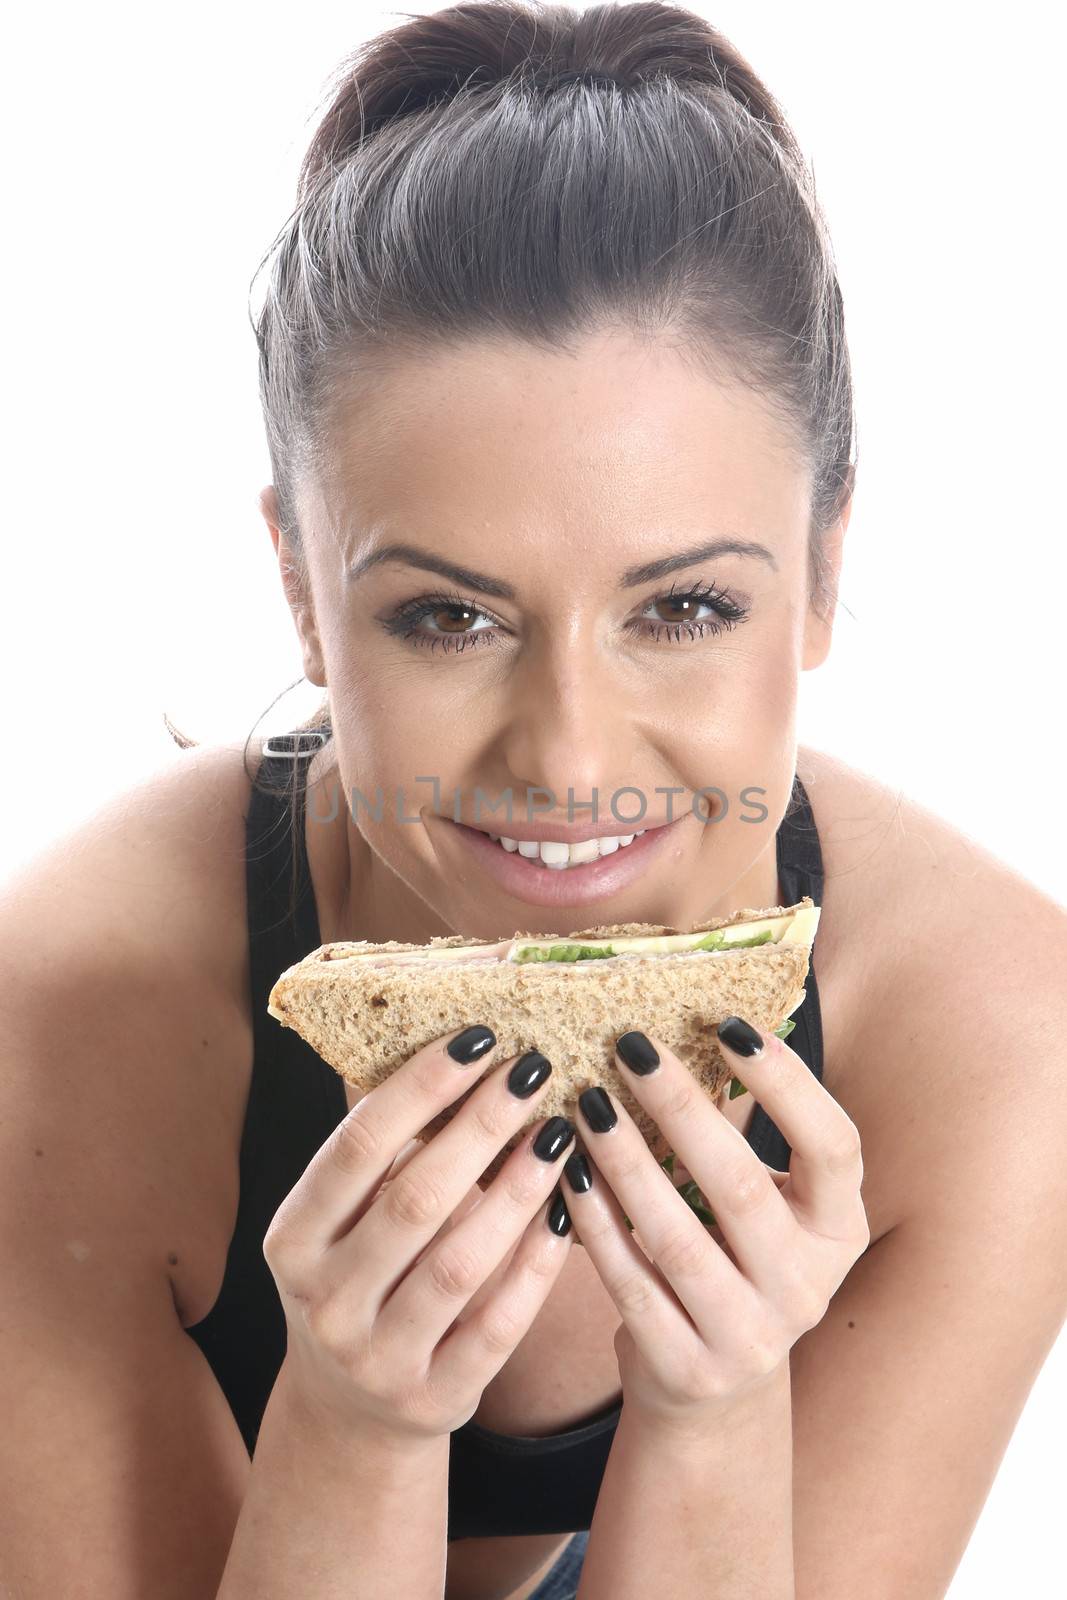 Model Released. Young Woman Eating Sandwich